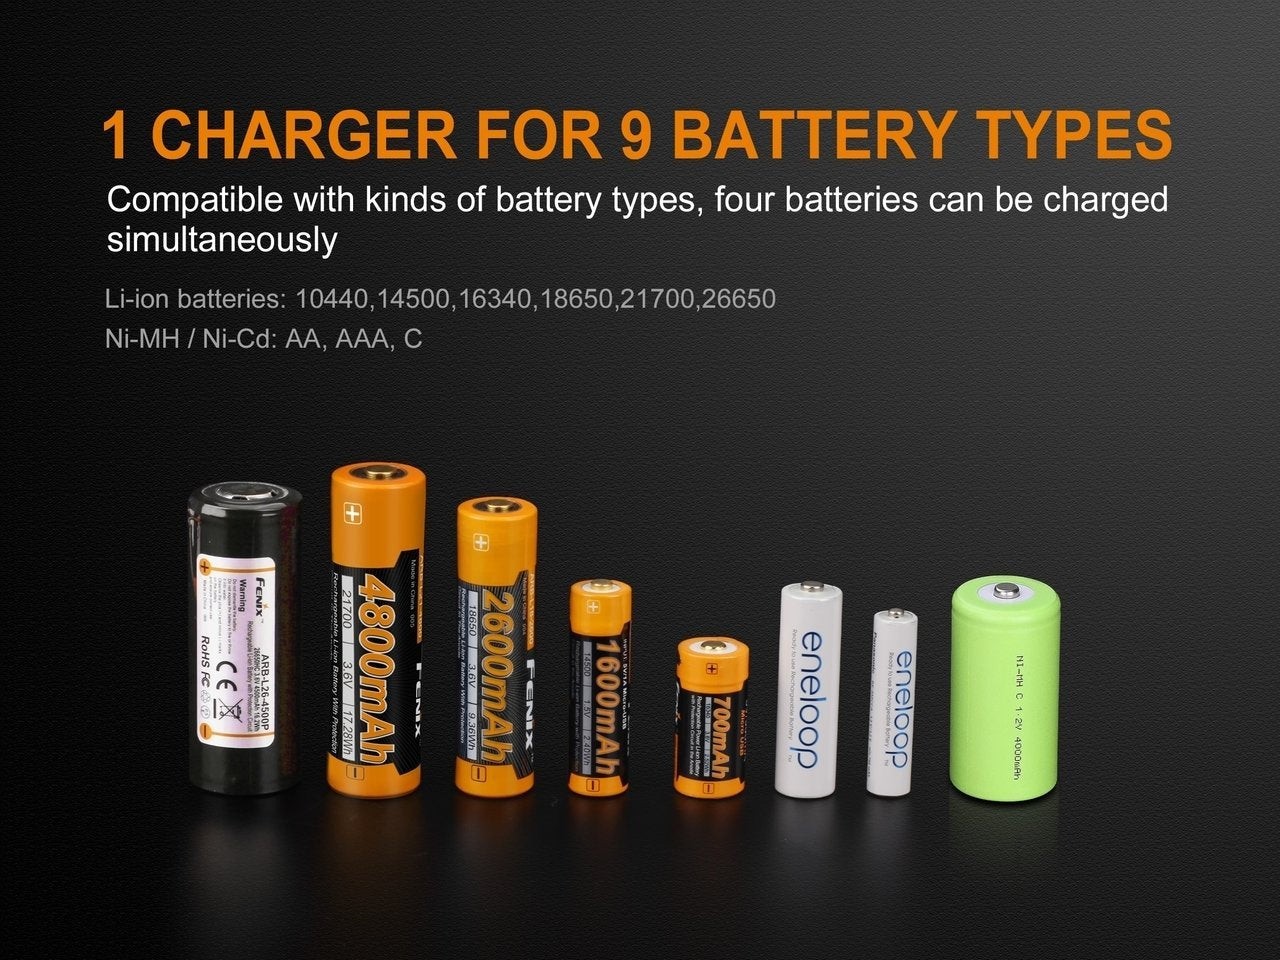 Can charge 9 different kinds of battery